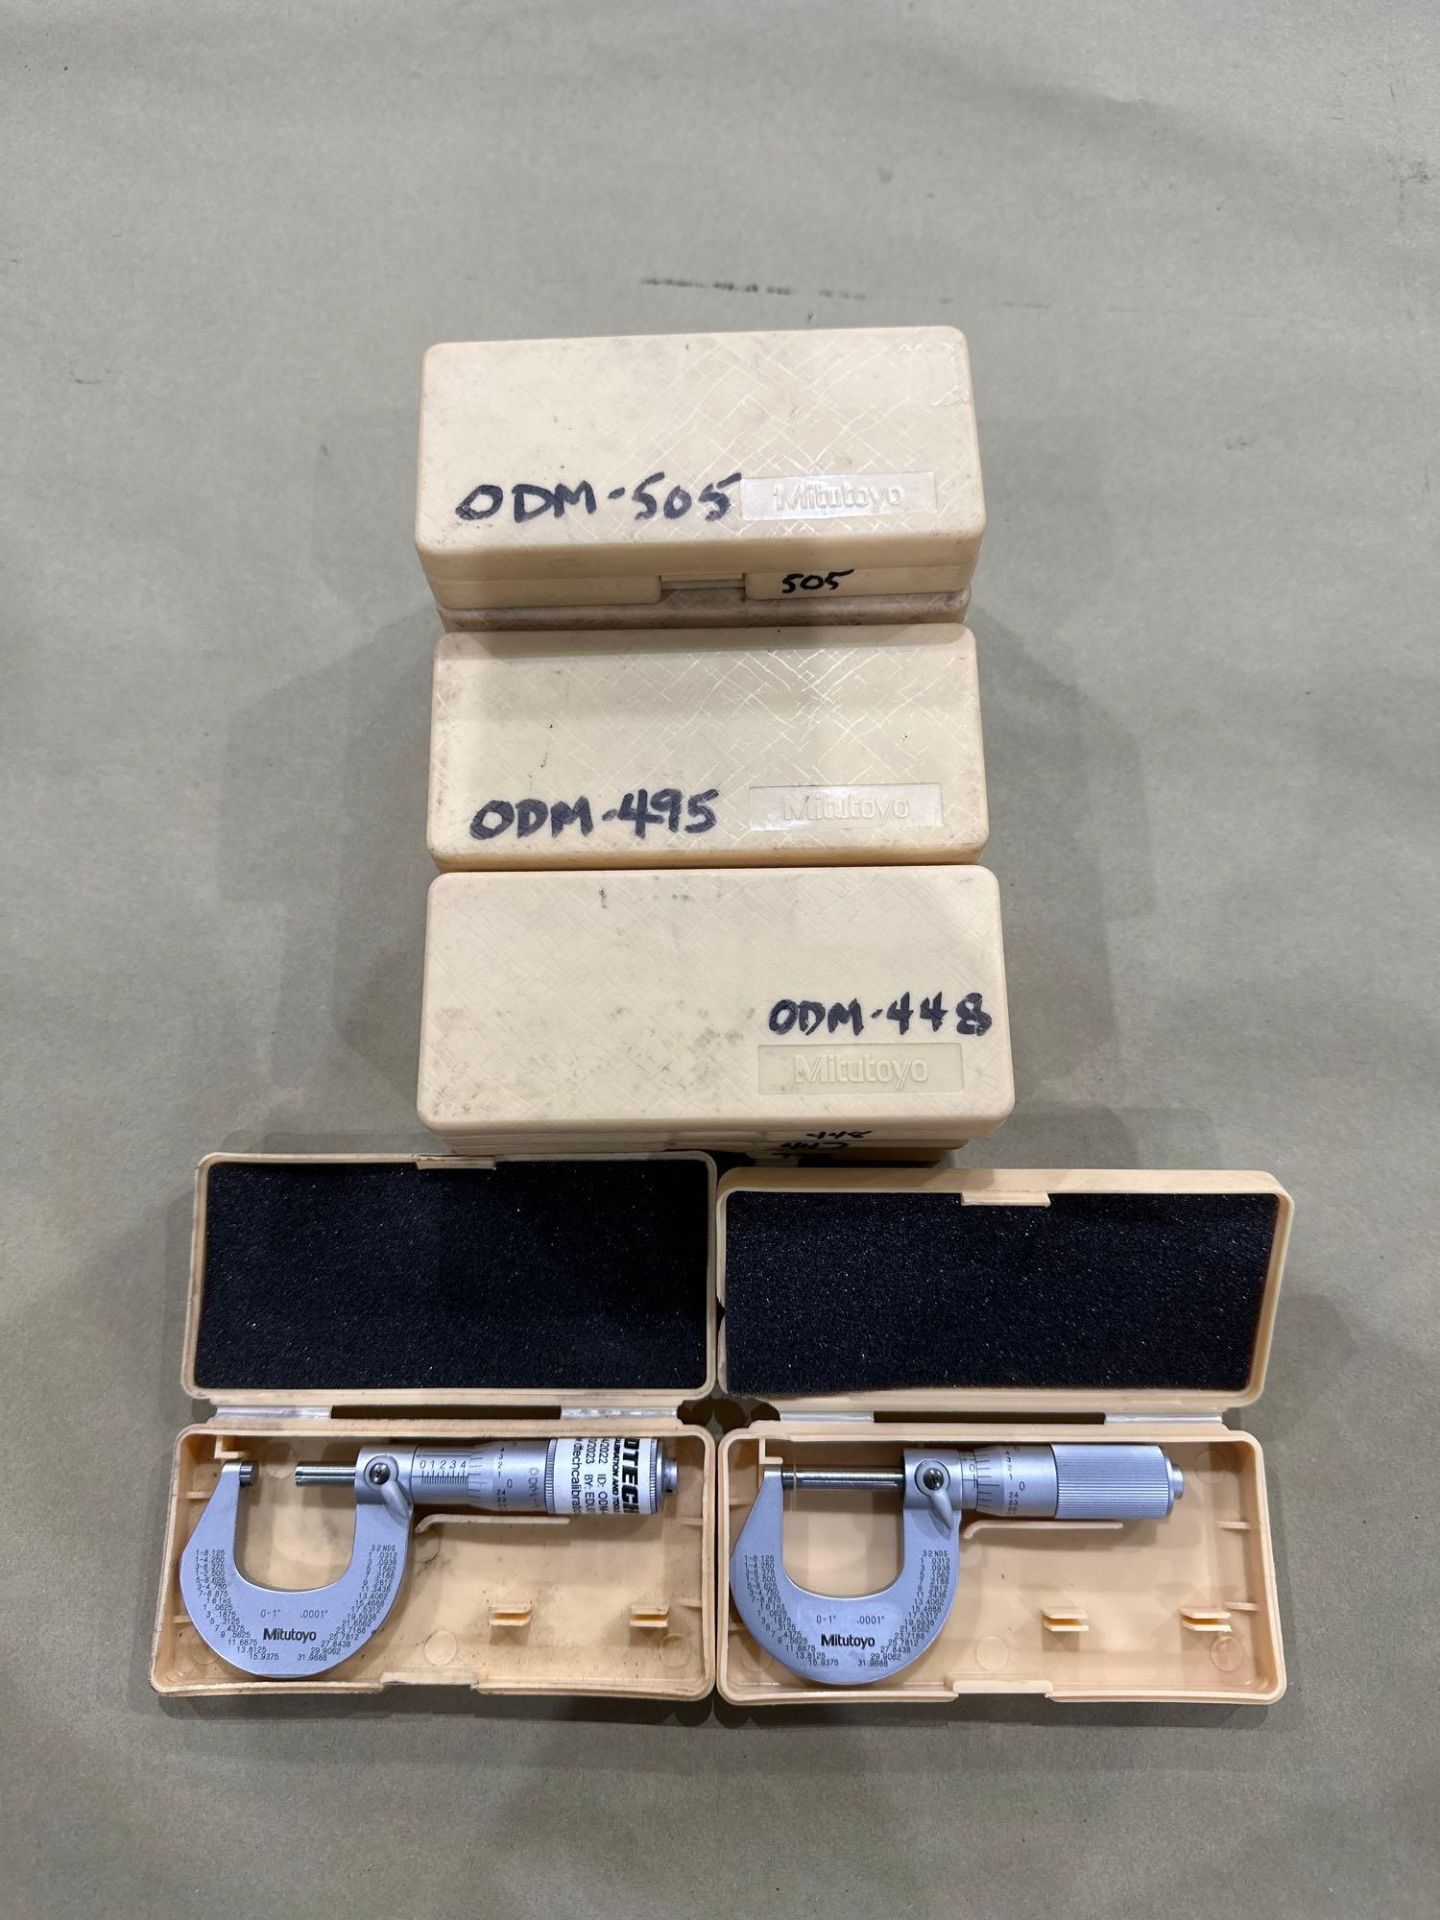 Lot of 12: Mitutoyo Mechanical OD Micrometer M225-1”, 0-1” Range, .0001” Graduation in plastic boxes - Image 7 of 7